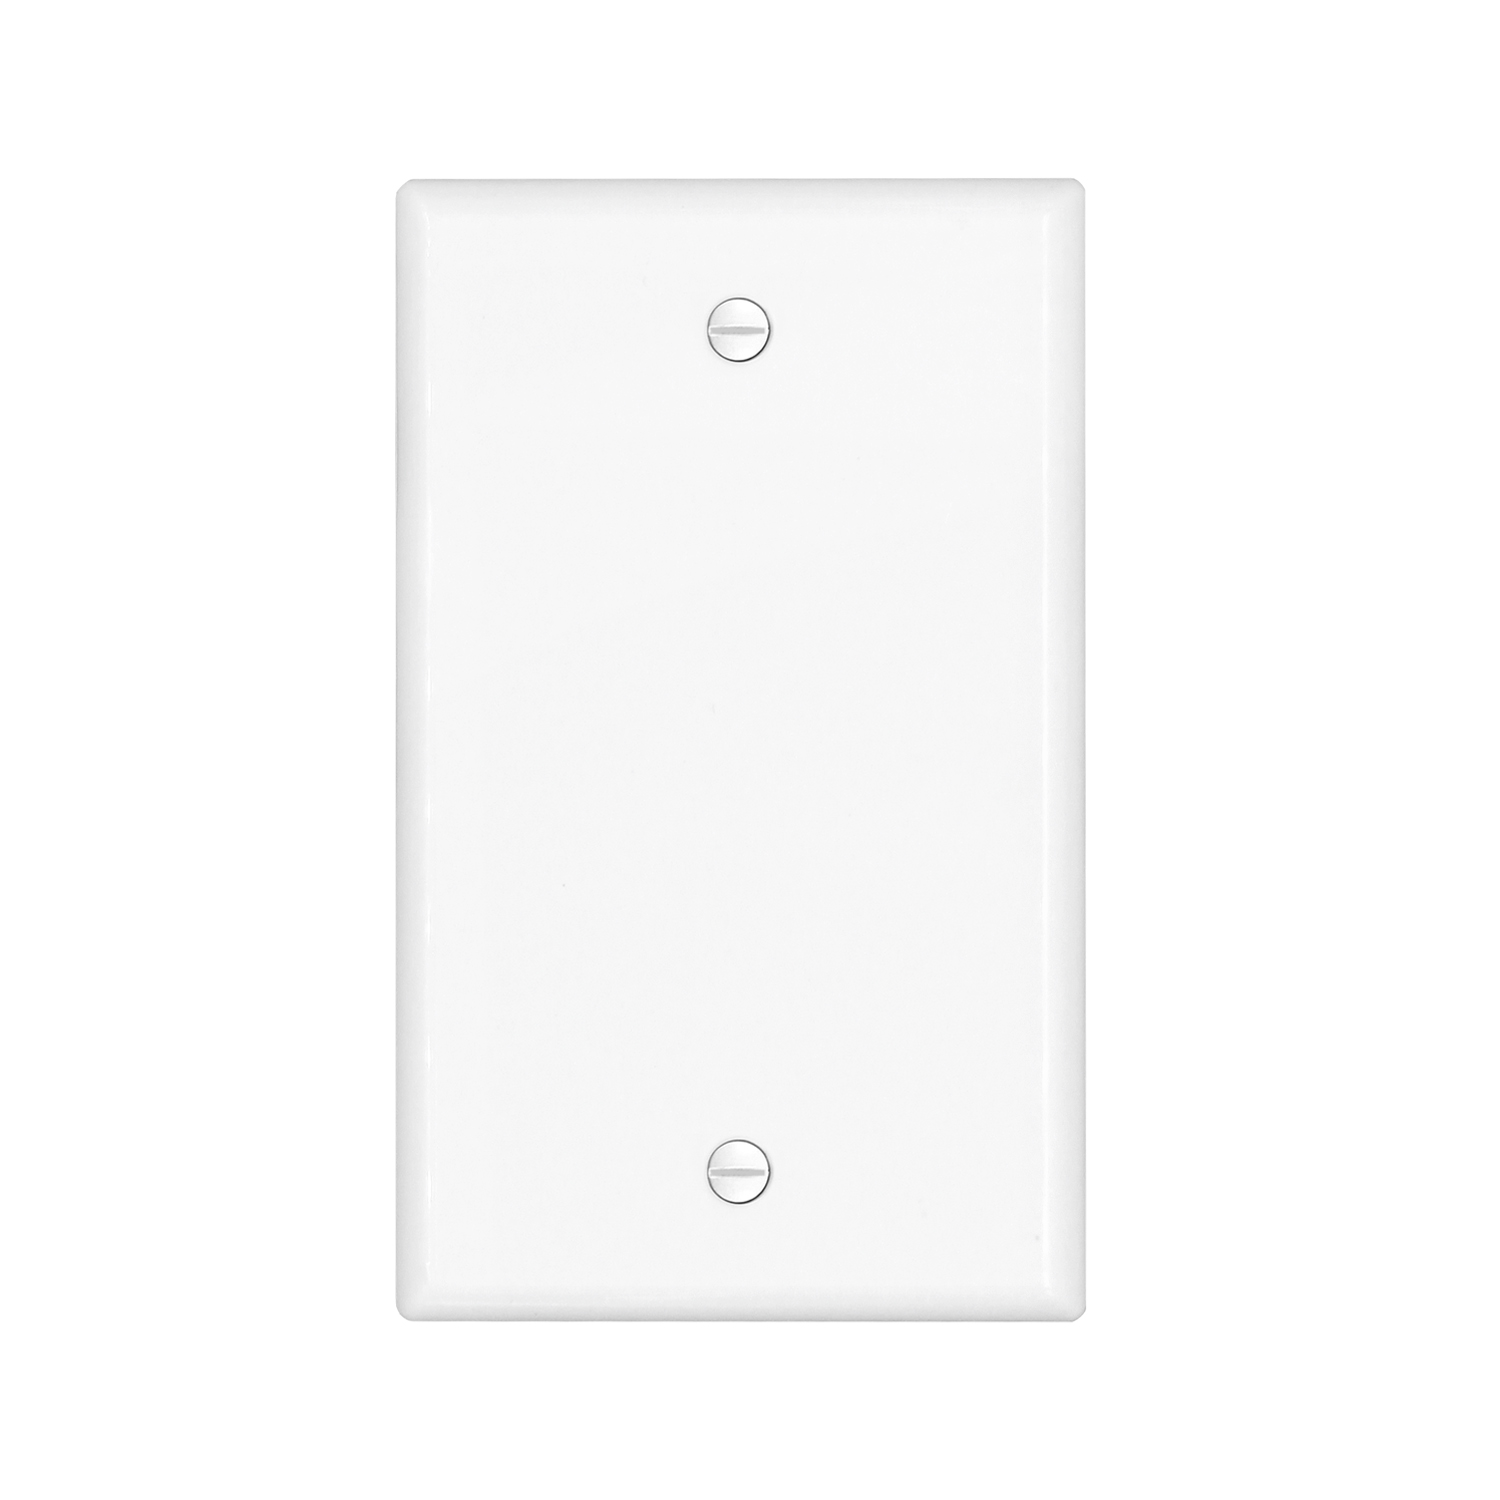 UL Listed Polycarbonate Thermoplastic 1-Gang Standard Size Blank Outlet Cover